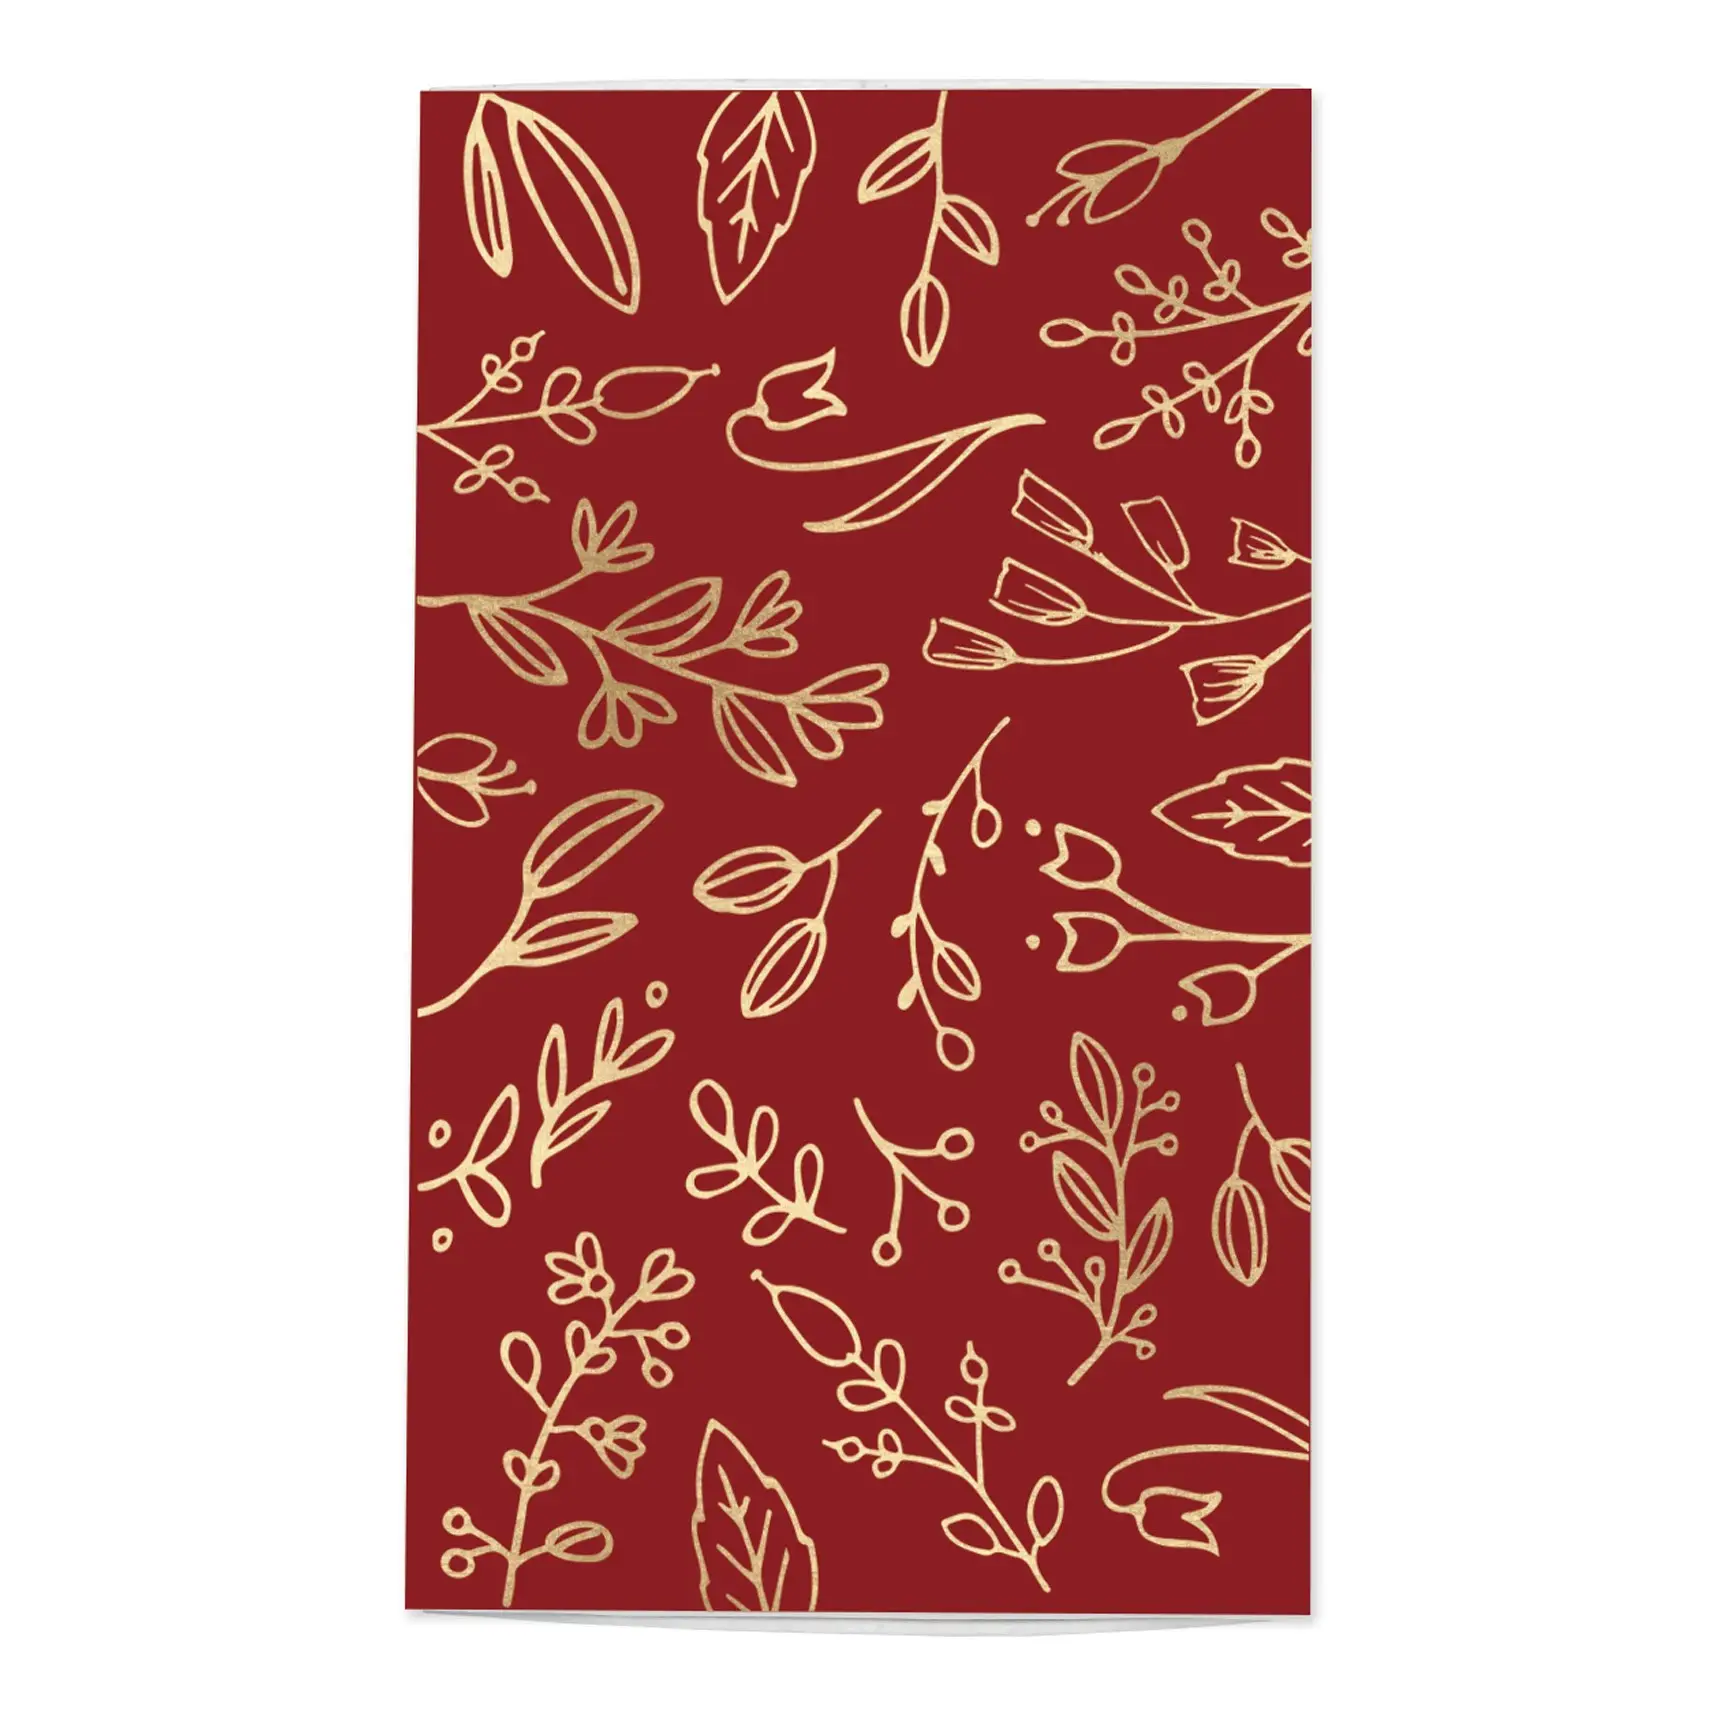 Large Match Box: Red & Gold Foil Floral